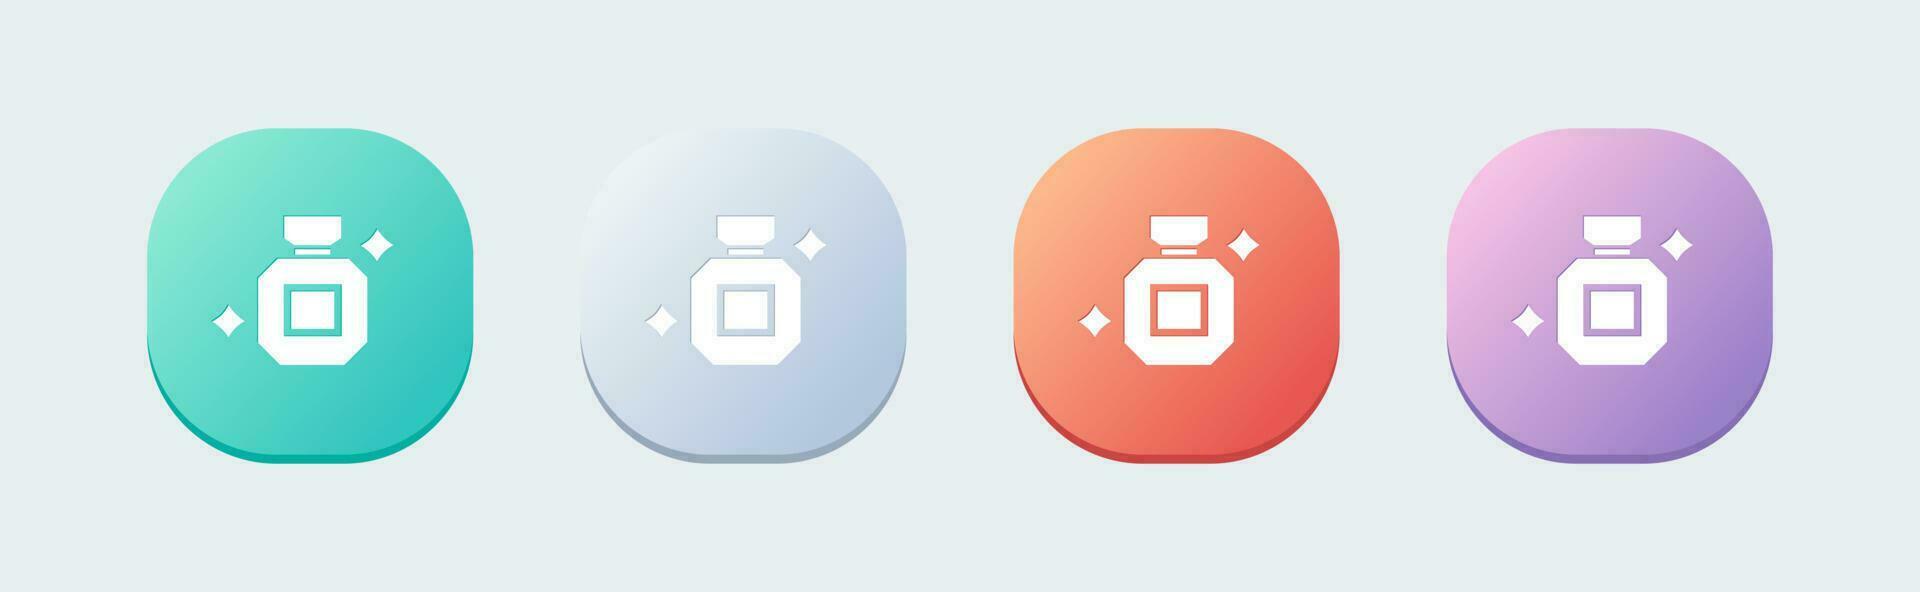 Perfume solid icon in flat design style. Bottle signs vector illustration.